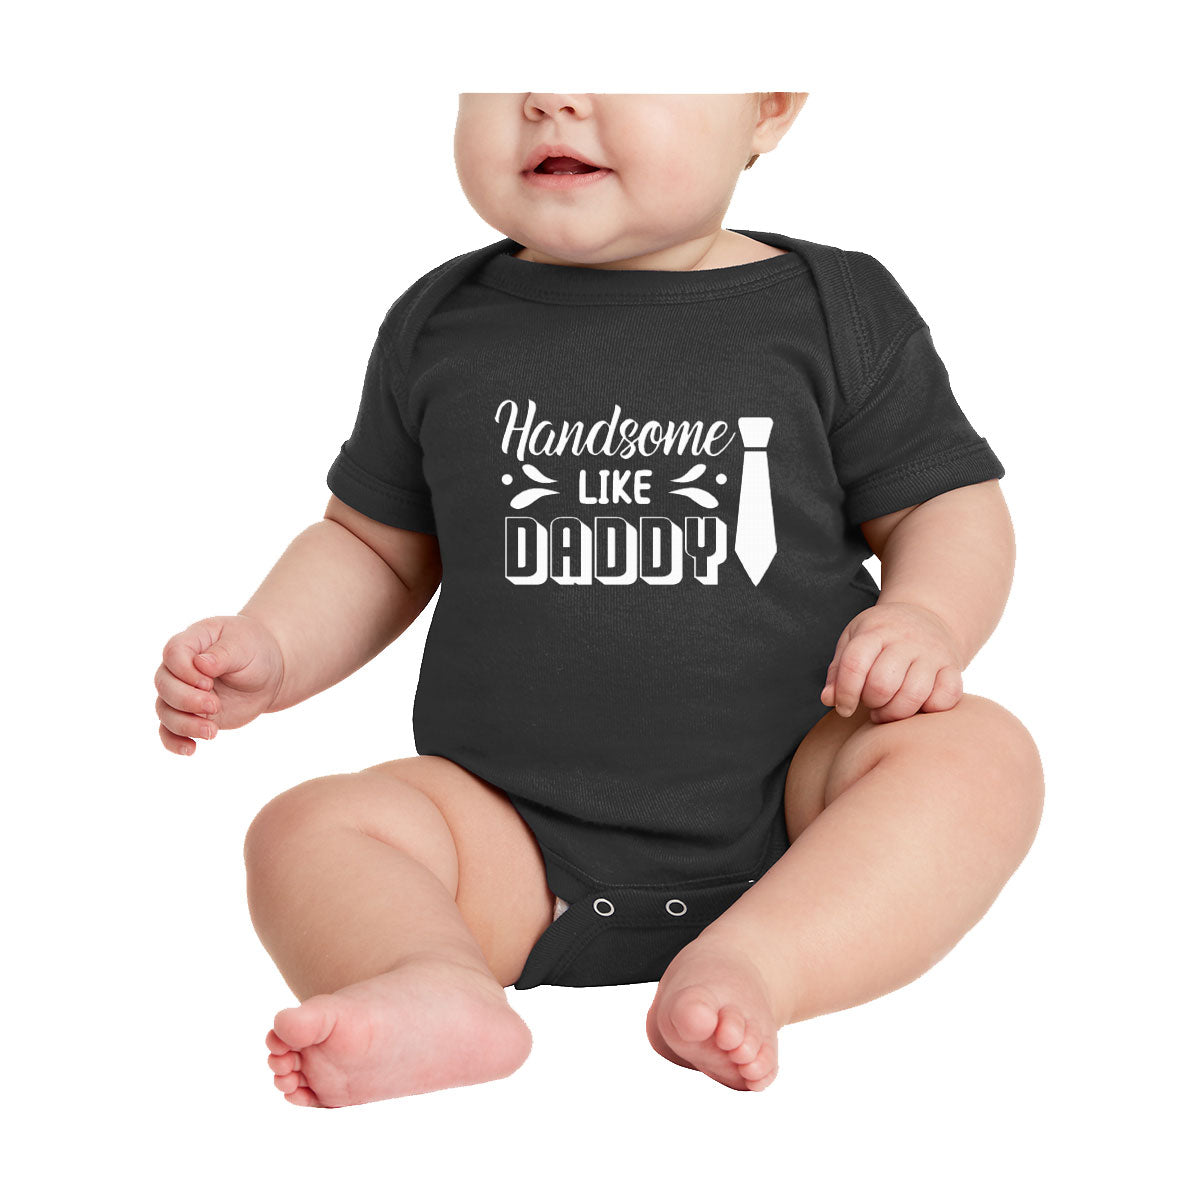 Handsome Like Daddy Baby Onesie